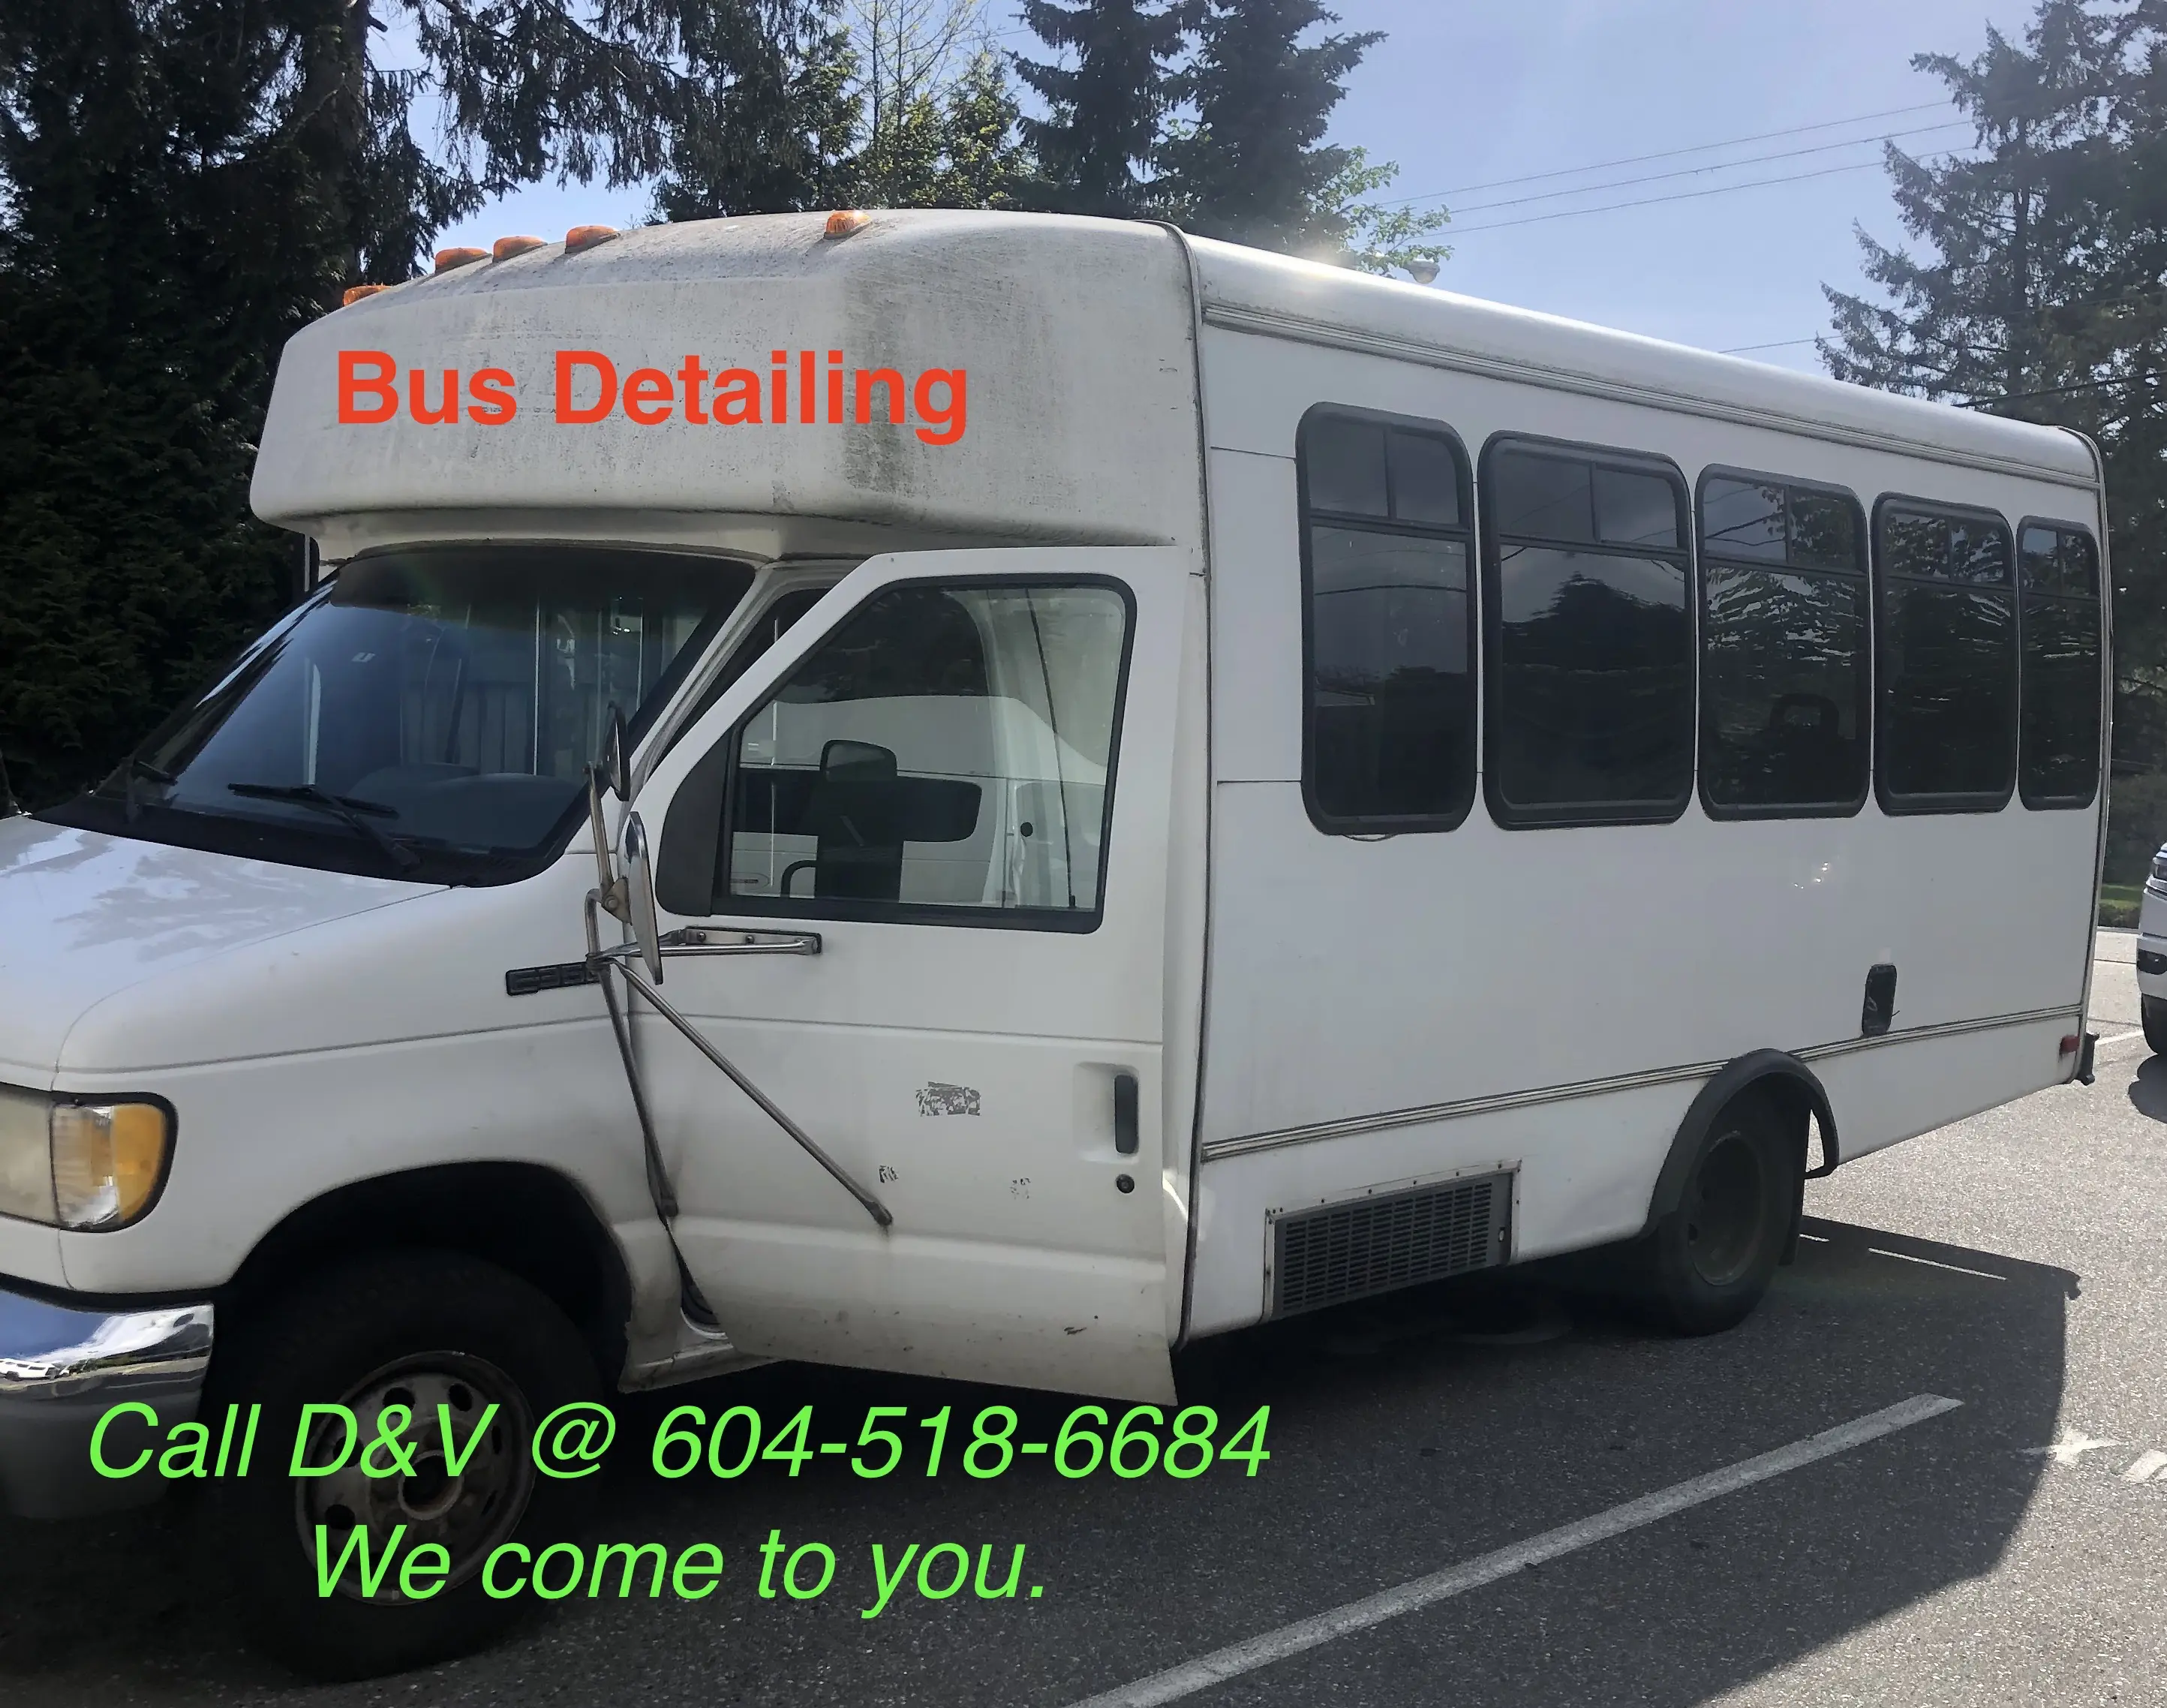 picture showing bus detailing service